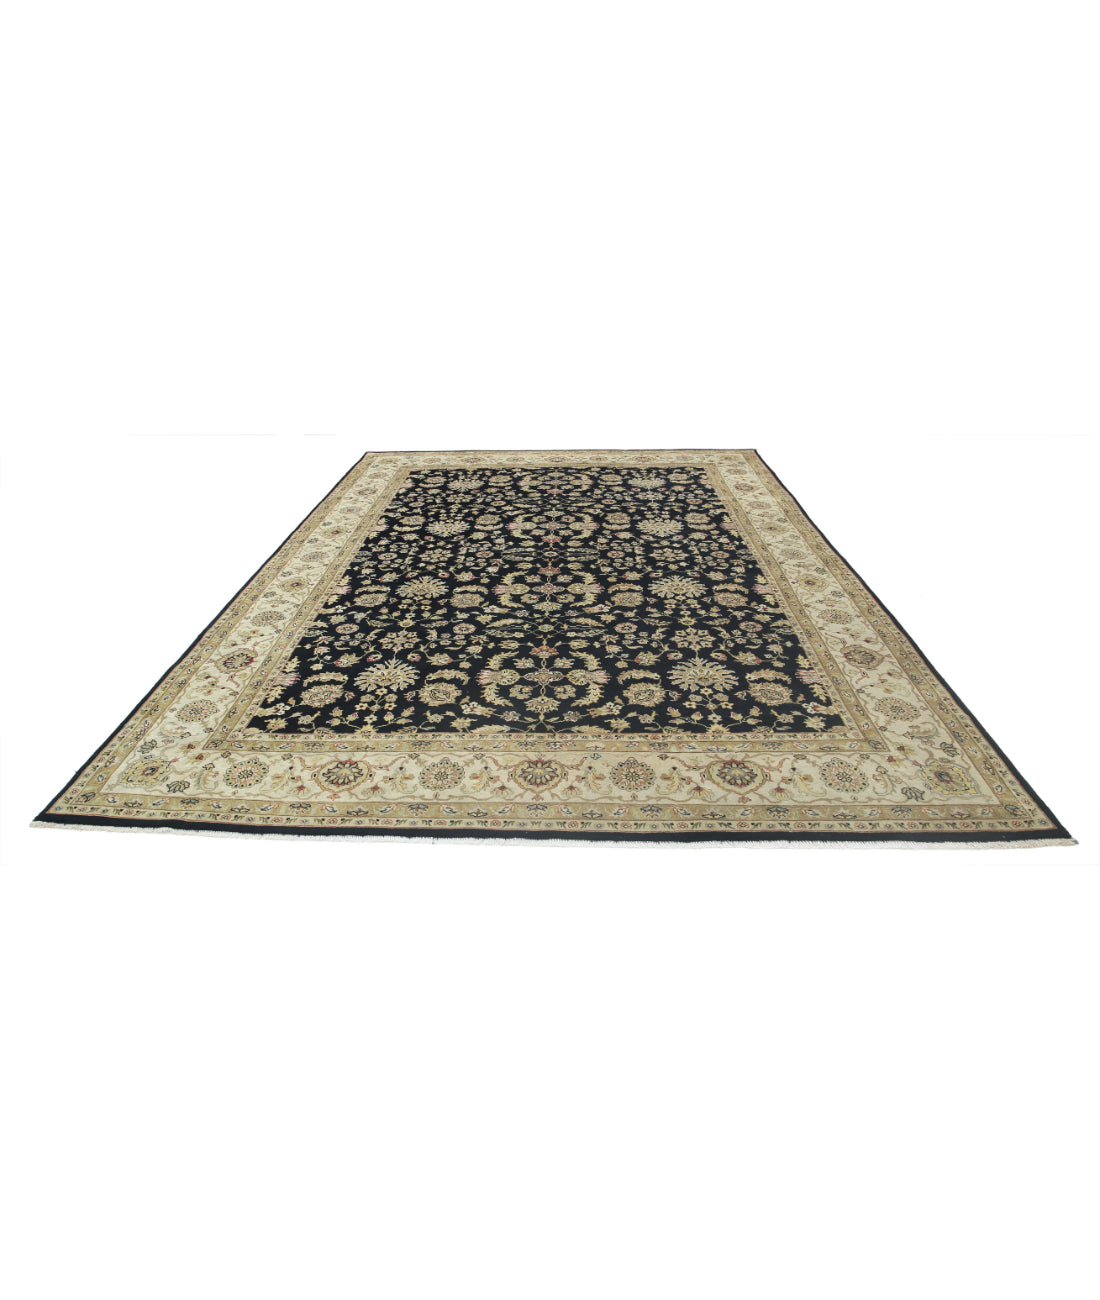 Ziegler 8'11'' X 12'1'' Hand-Knotted Wool Rug 8'11'' x 12'1'' (268 X 363) / Black / N/A